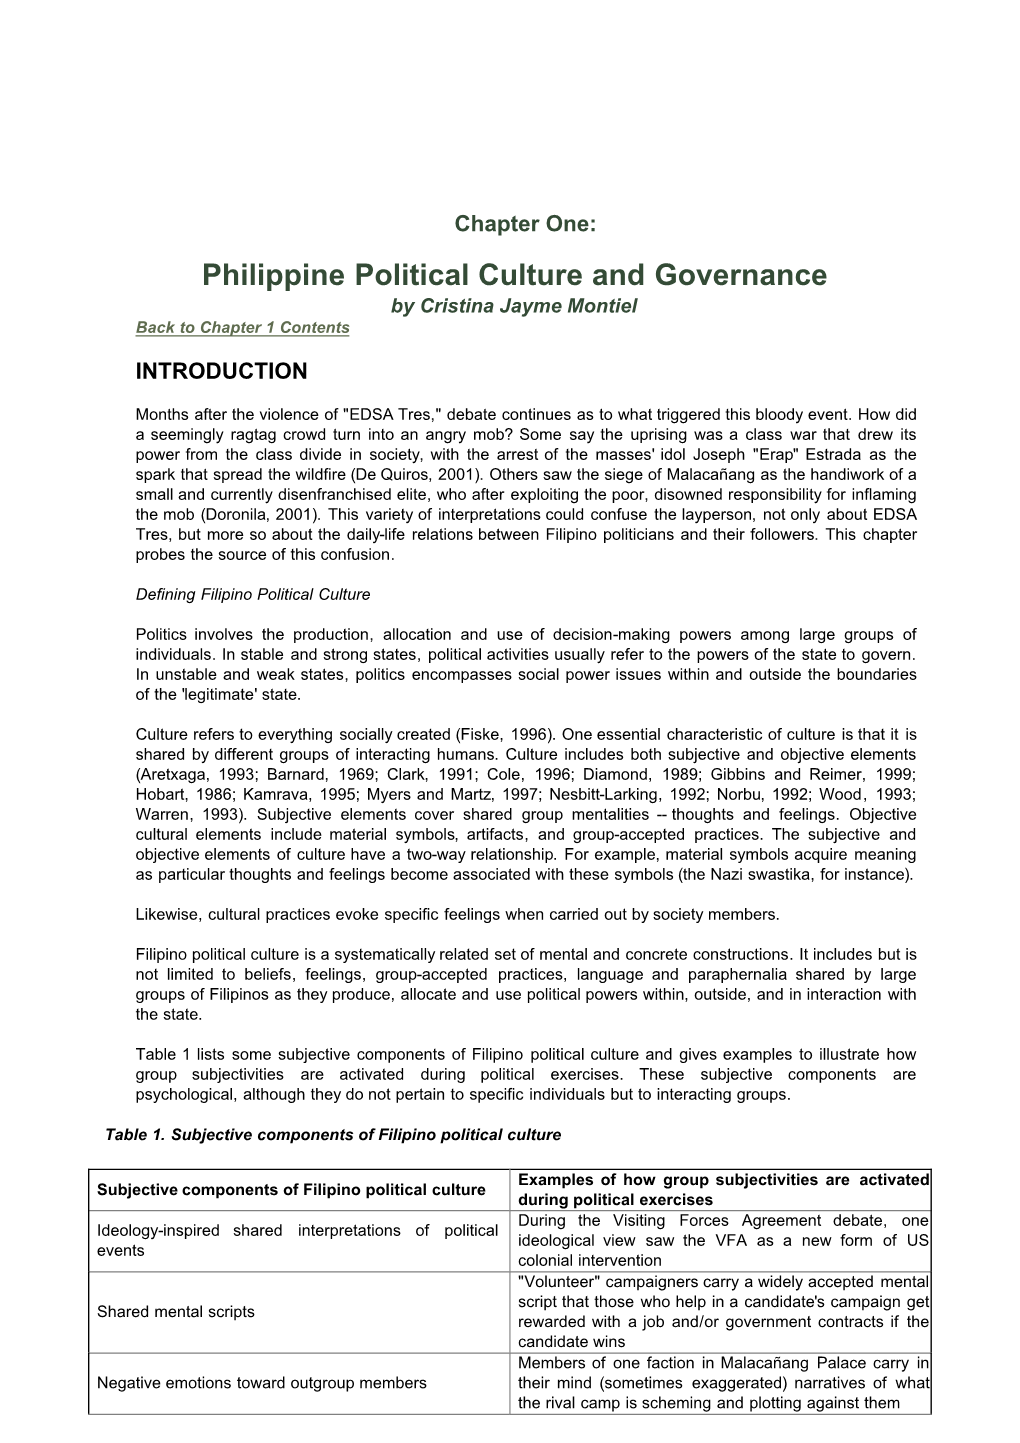 Philippine Political Culture and Governance by Cristina Jayme Montiel Back to Chapter 1 Contents